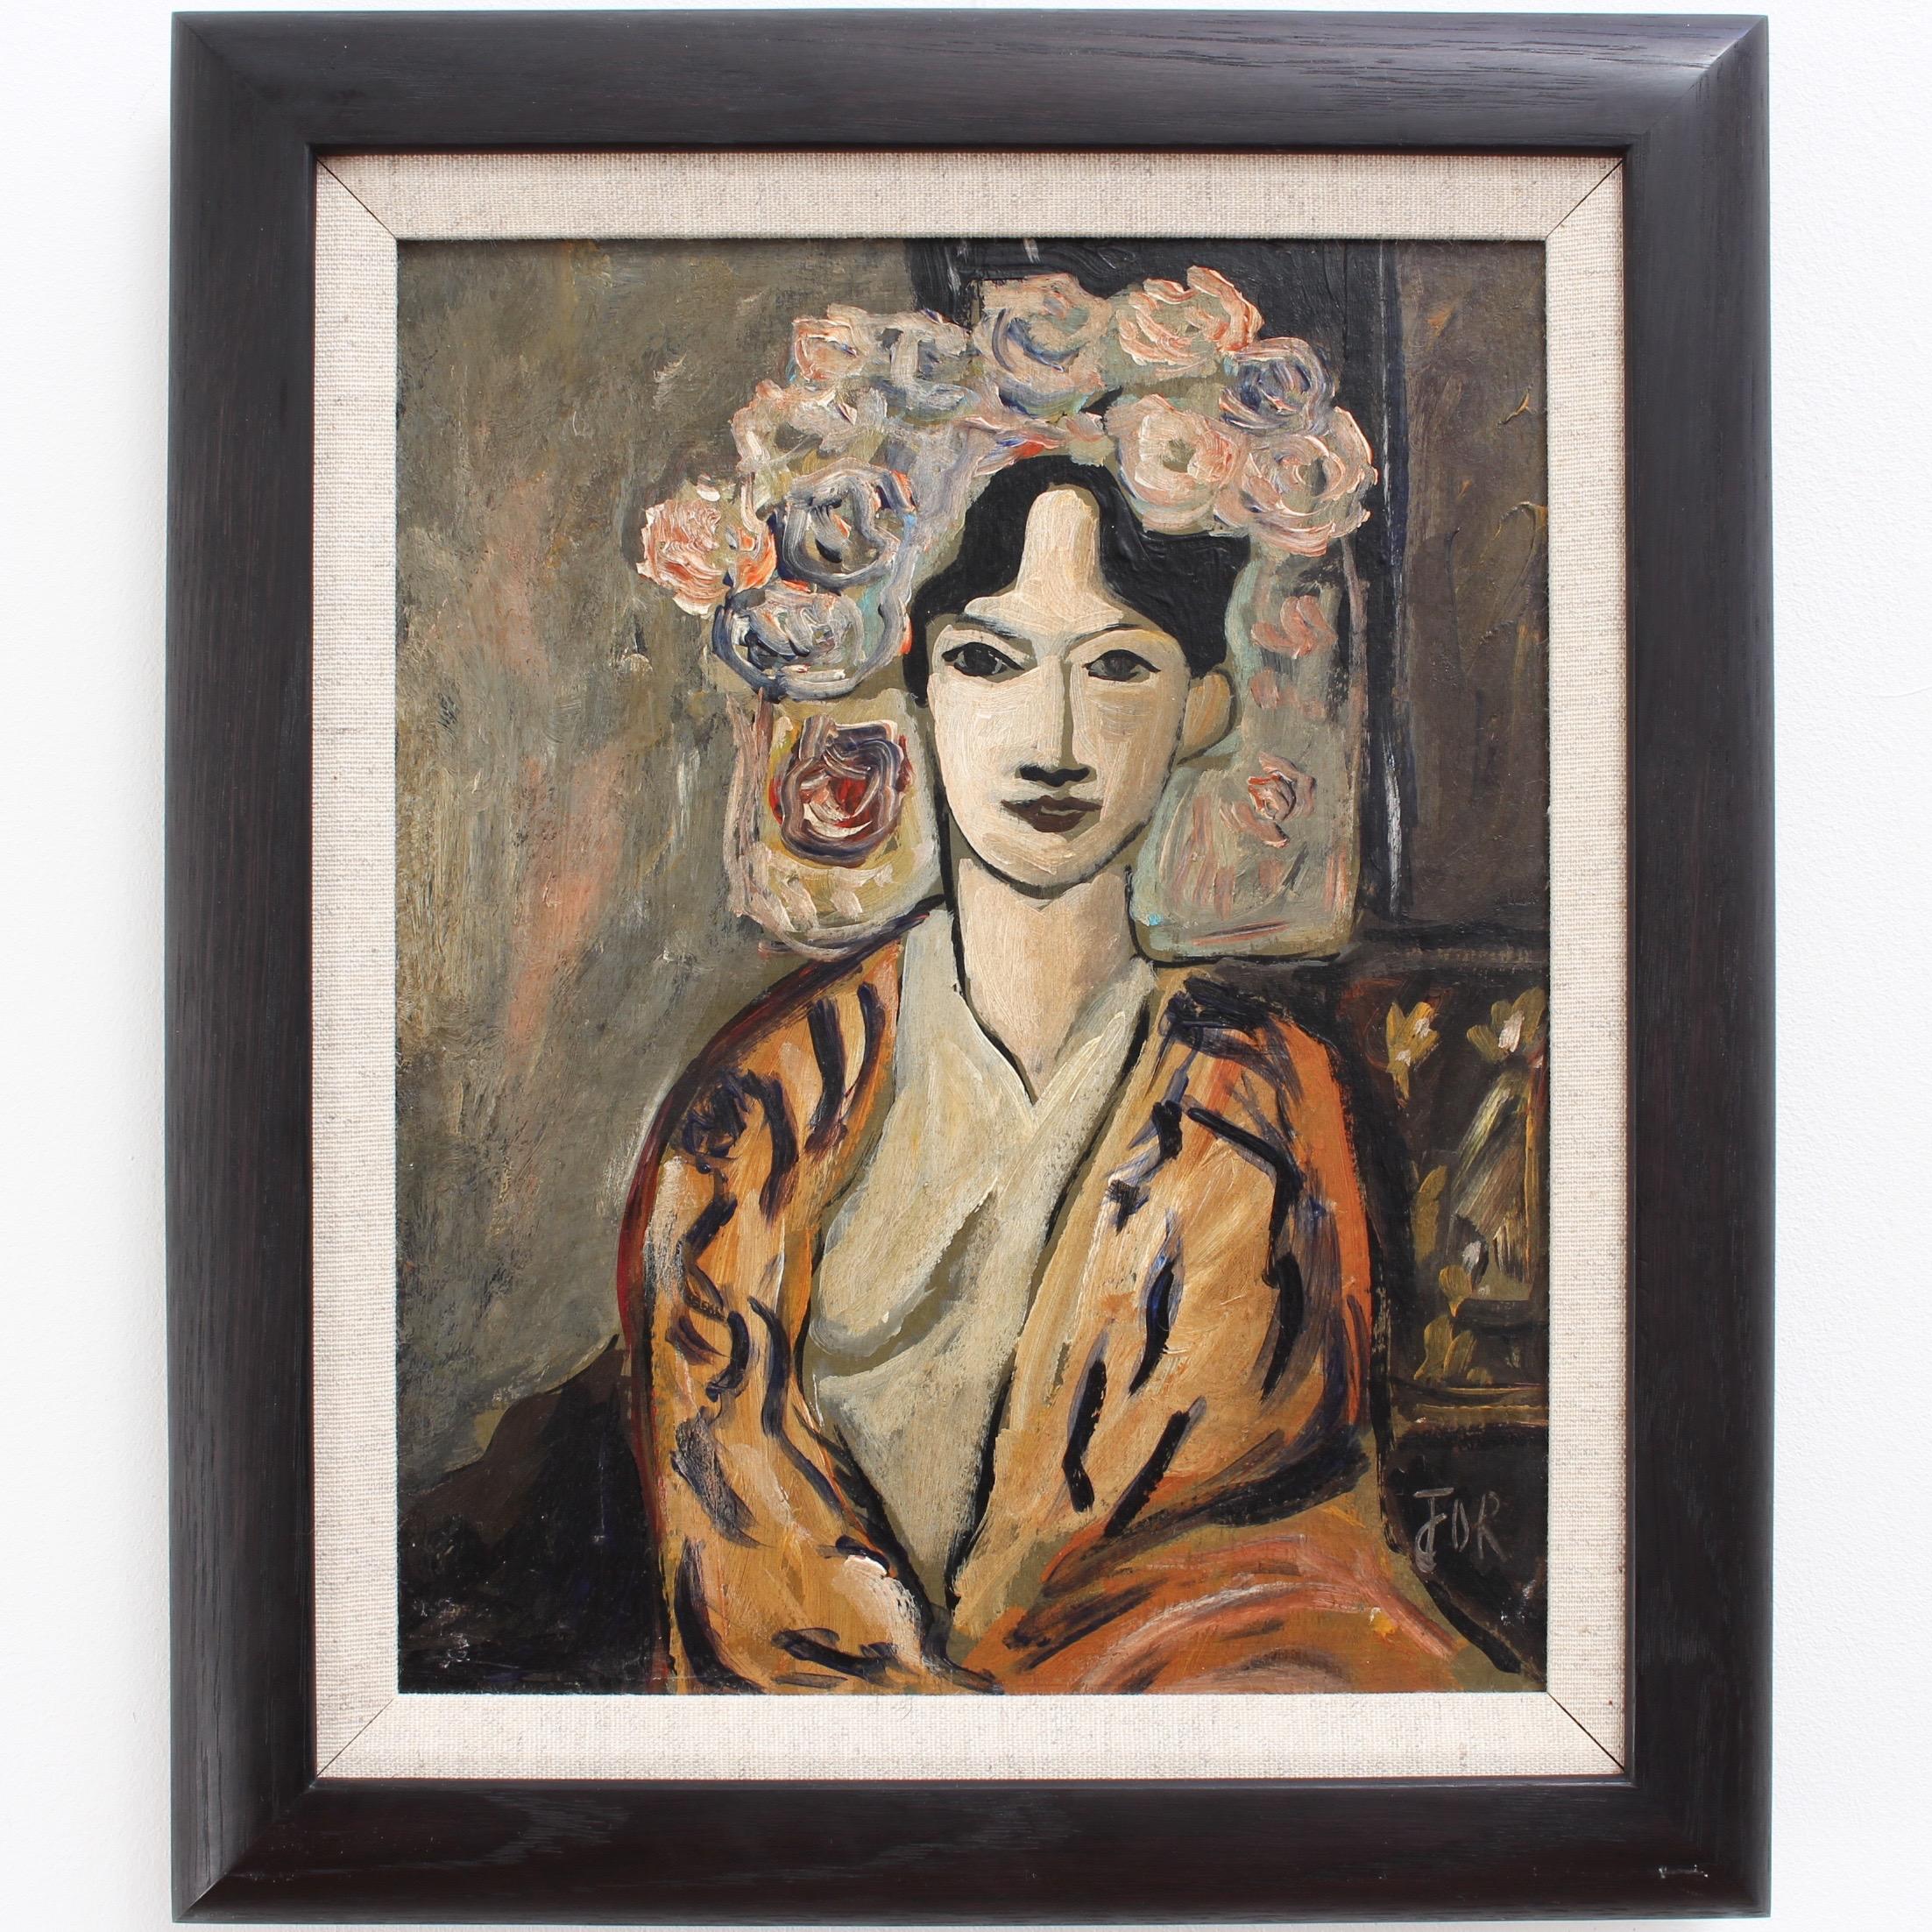  F.O.R., 'Flowered Woman in Robe', Midcentury Oil Portrait Painting, Berlin - Brown Figurative Painting by Unknown